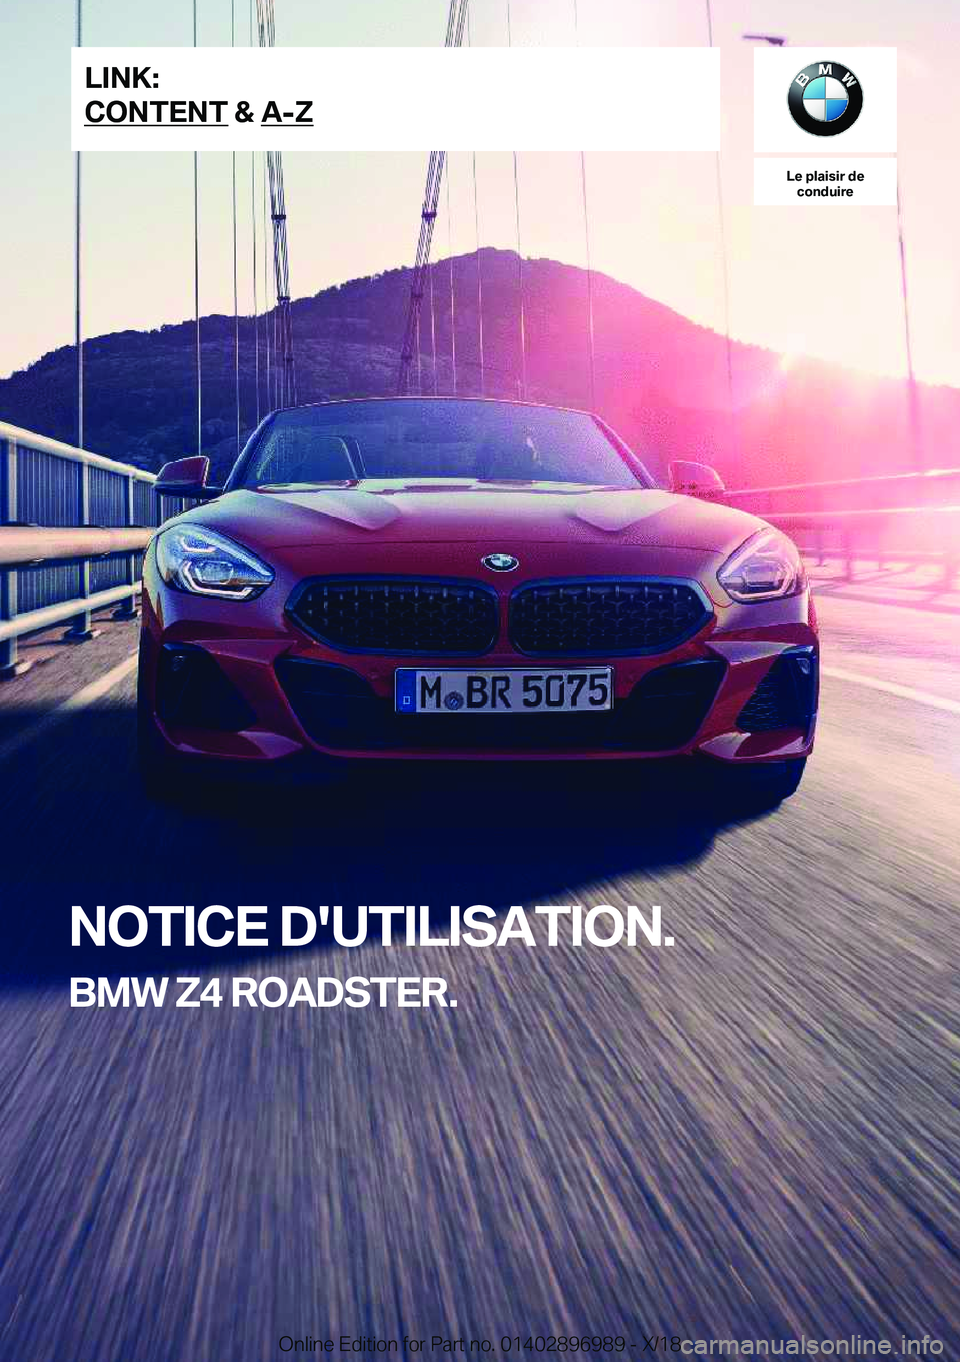 BMW Z4 2019  Notices Demploi (in French) �L�e��p�l�a�i�s�i�r��d�e�c�o�n�d�u�i�r�e
�N�O�T�I�C�E��D�'�U�T�I�L�I�S�A�T�I�O�N�.
�B�M�W��Z�4��R�O�A�D�S�T�E�R�.�L�I�N�K�:
�C�O�N�T�E�N�T��&��A�-�Z�O�n�l�i�n�e��E�d�i�t�i�o�n��f�o�r��P�